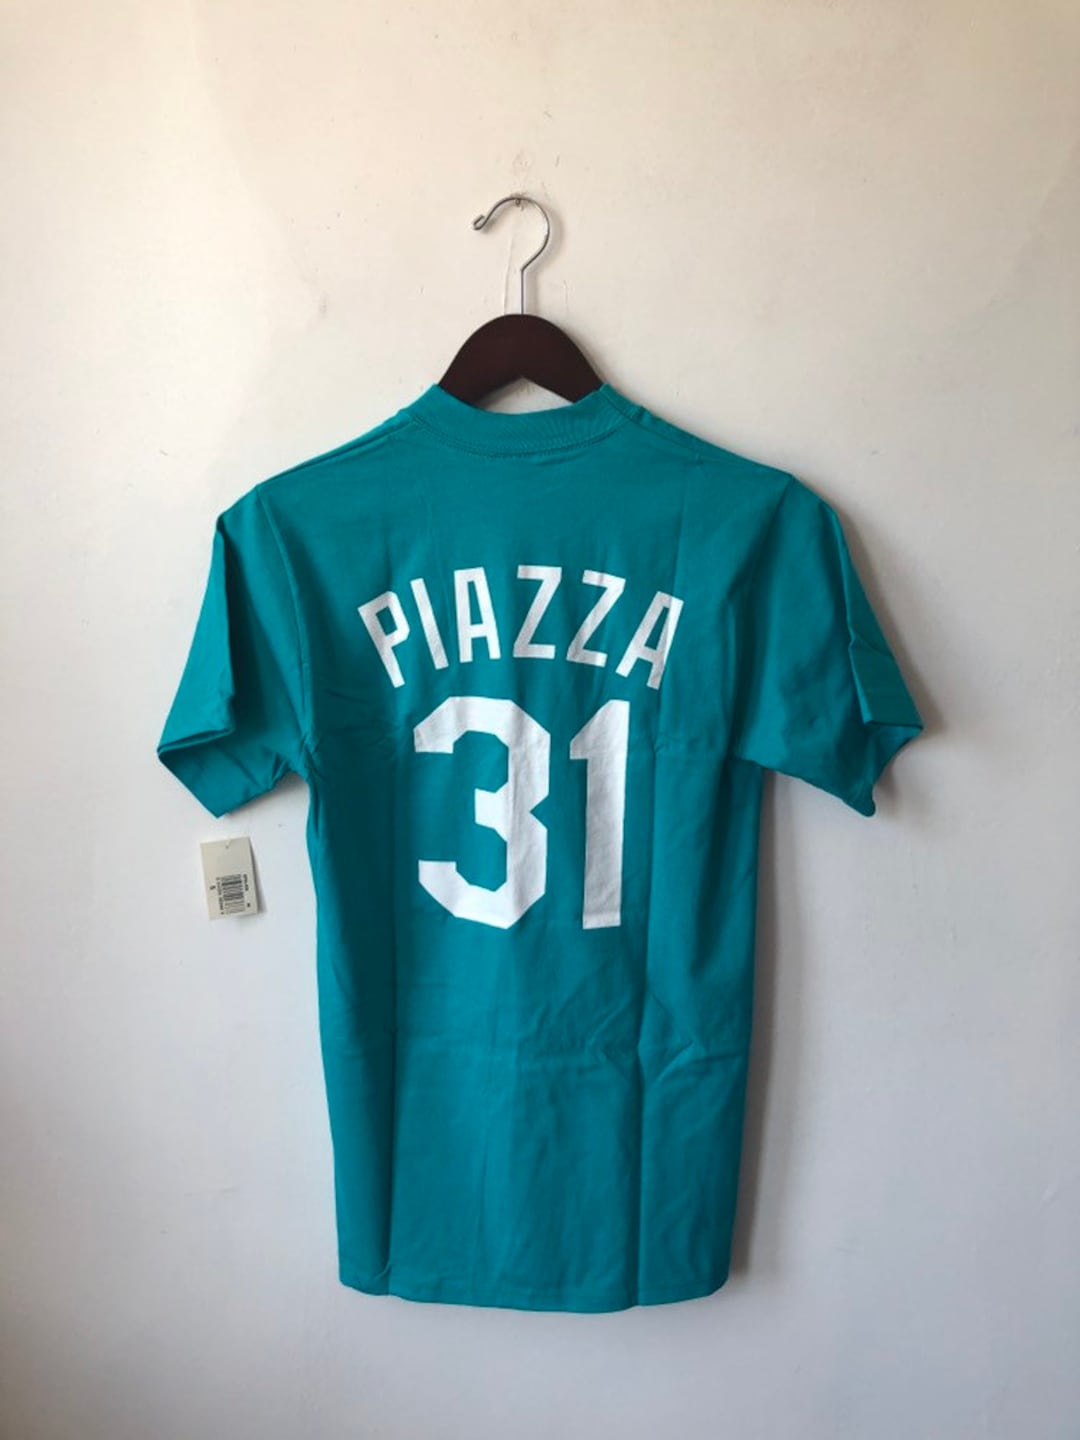 FLORIDA MARLINS VINTAGE 90s RUSSELL ATHLETIC BASEBALL JERSEY XXL